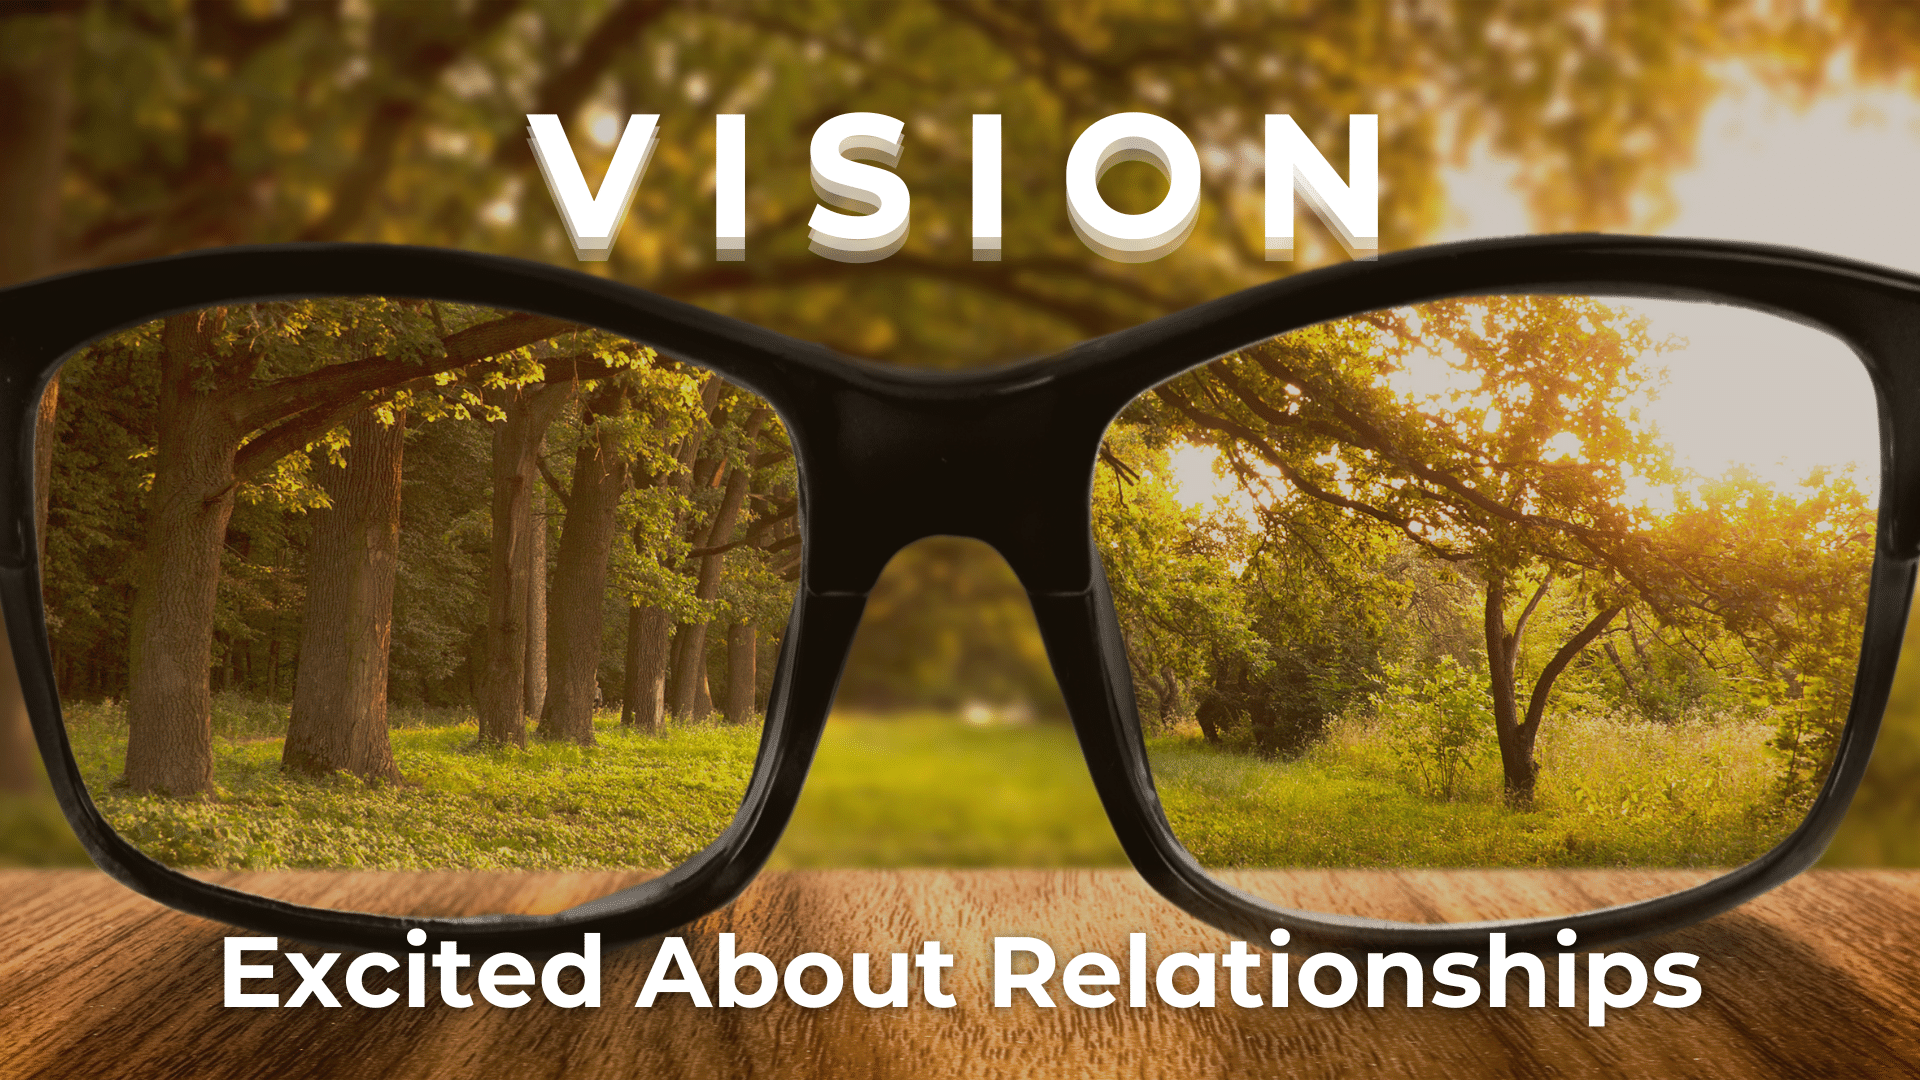 Vision: Excited About Relationships